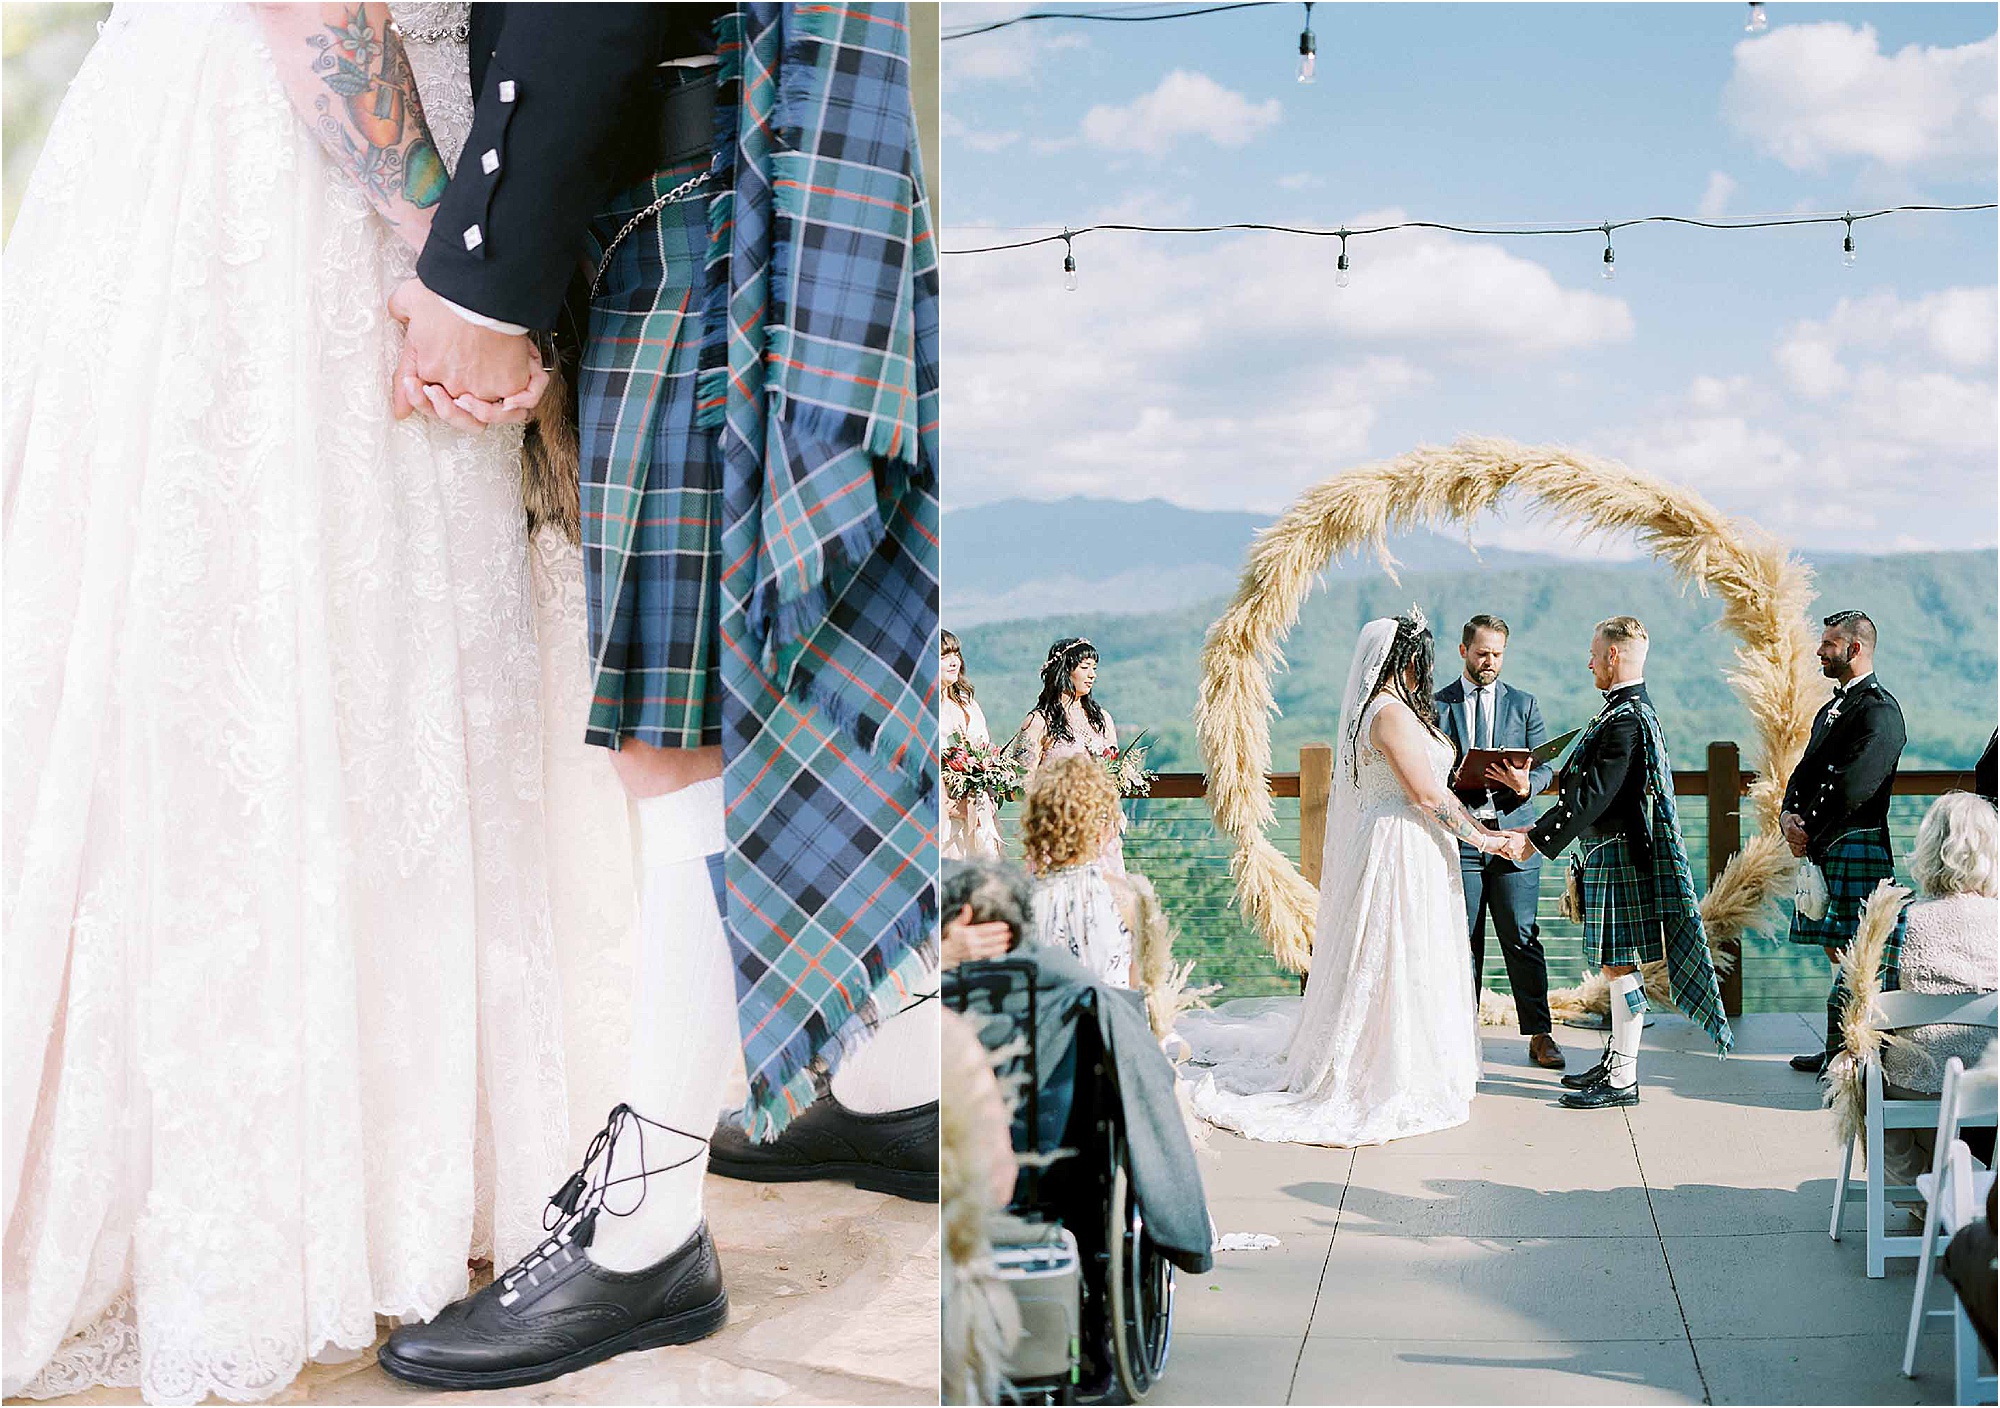 Scottish Wedding Ceremony at mountain venue in Tennessee